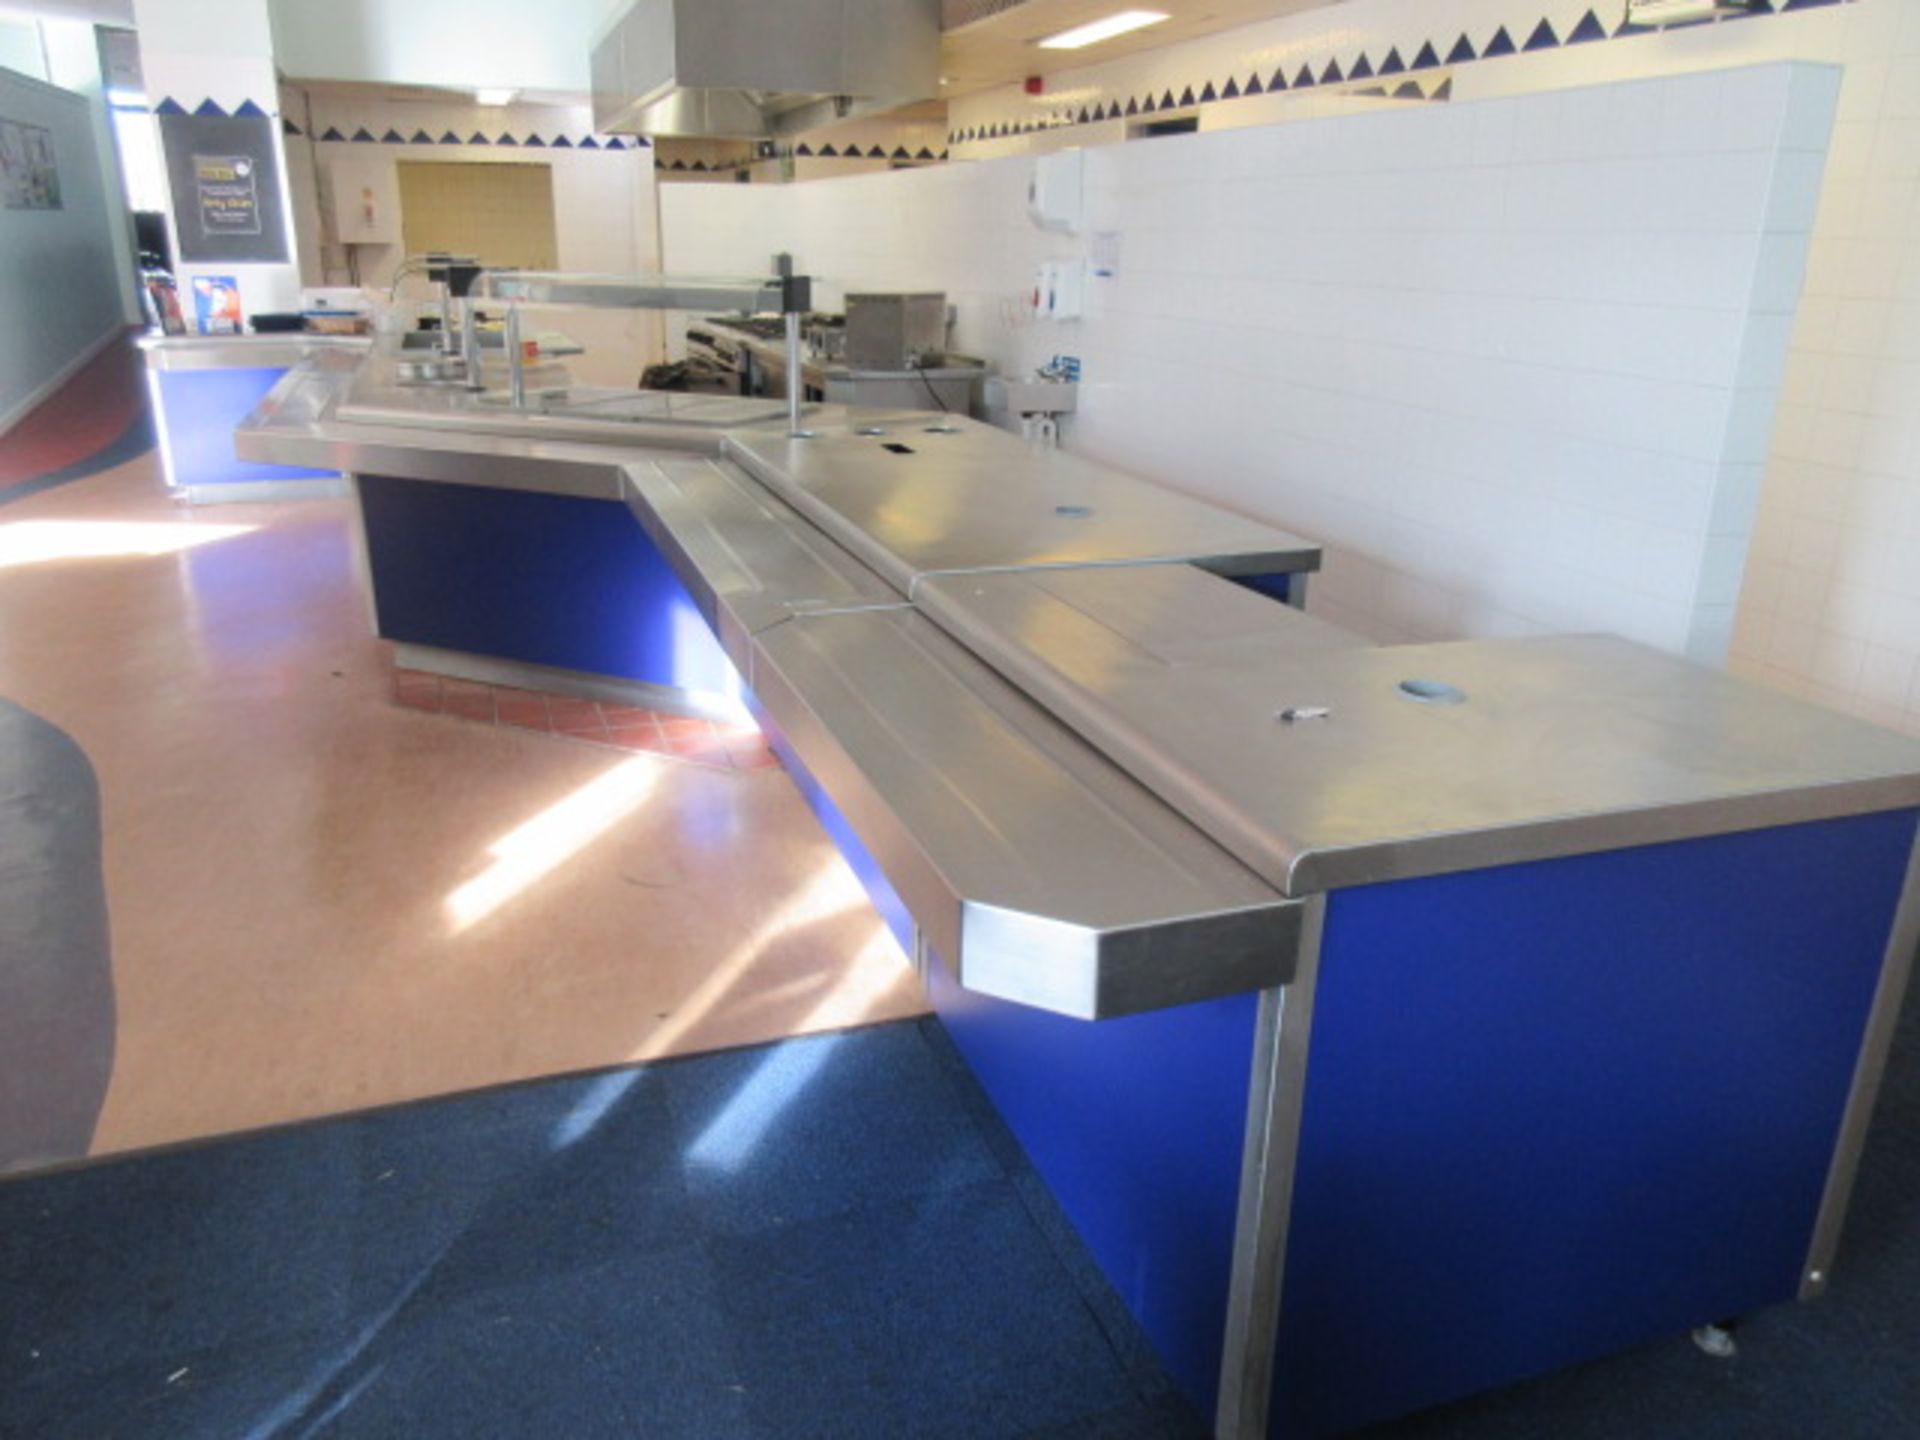 A SHAPED STAILESS STEEL BAIN MARIE WITH TRAY SHELF, HOT PLATE, SOUP POT. & REFRIGERATED UNITS